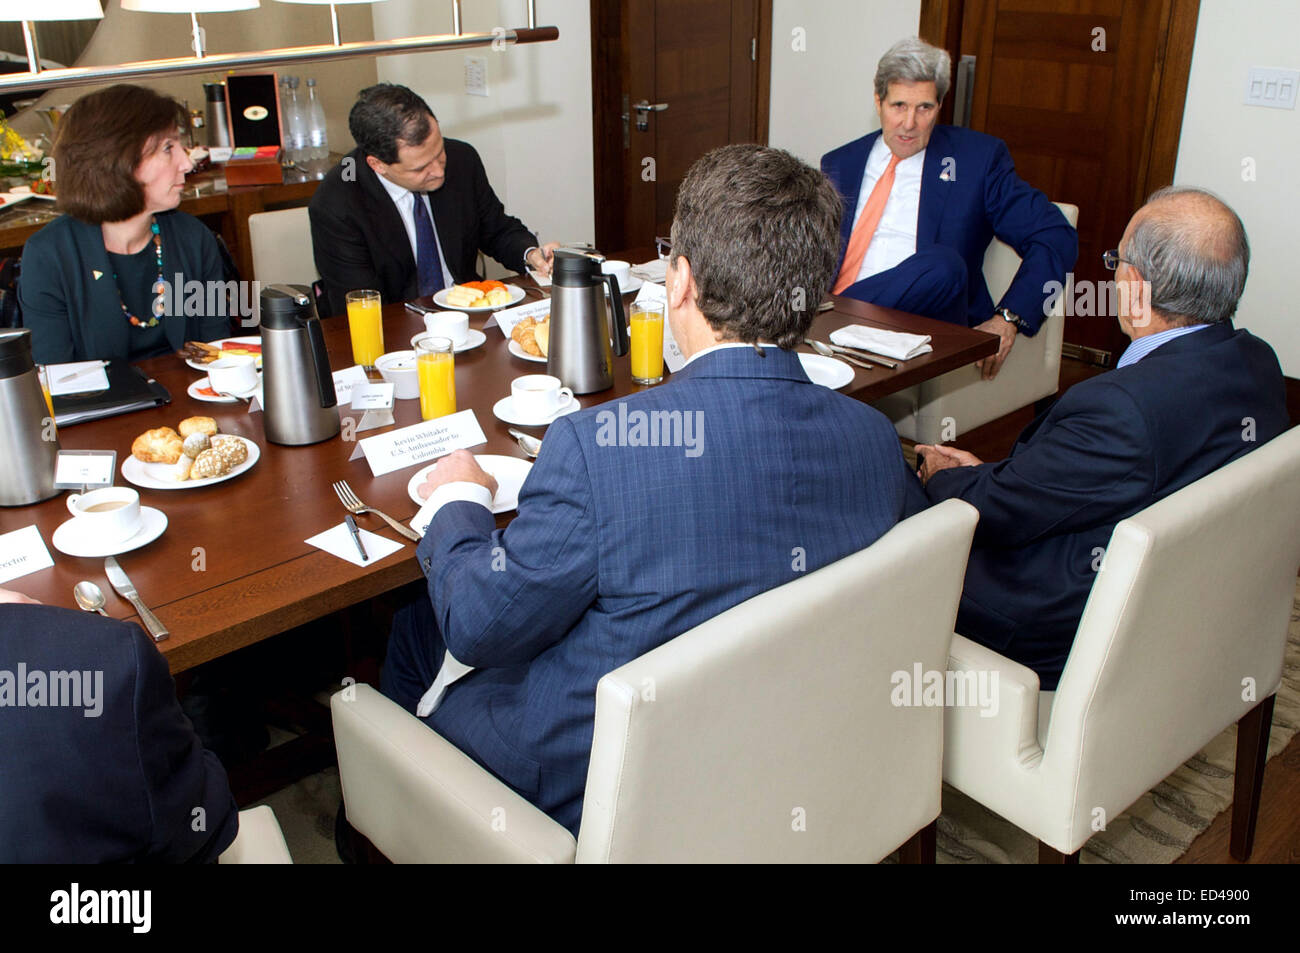 U.S. Secretary of State John Kerry, joined by U.S. Ambassador to Colombia Kevin Whitaker and U.S. Assistant Secretary of State for Western Hemispheric Affairs Roberta Jacobson, meets with Colombian lead negotiator Humberto de la Calle, right, and High Commissioner for Peace Sergio Jaramillo, left, on December 12, 2014, in Bogota, Colombia, to receive an update about their efforts to negotiate a peace treaty FARC rebels. Stock Photo